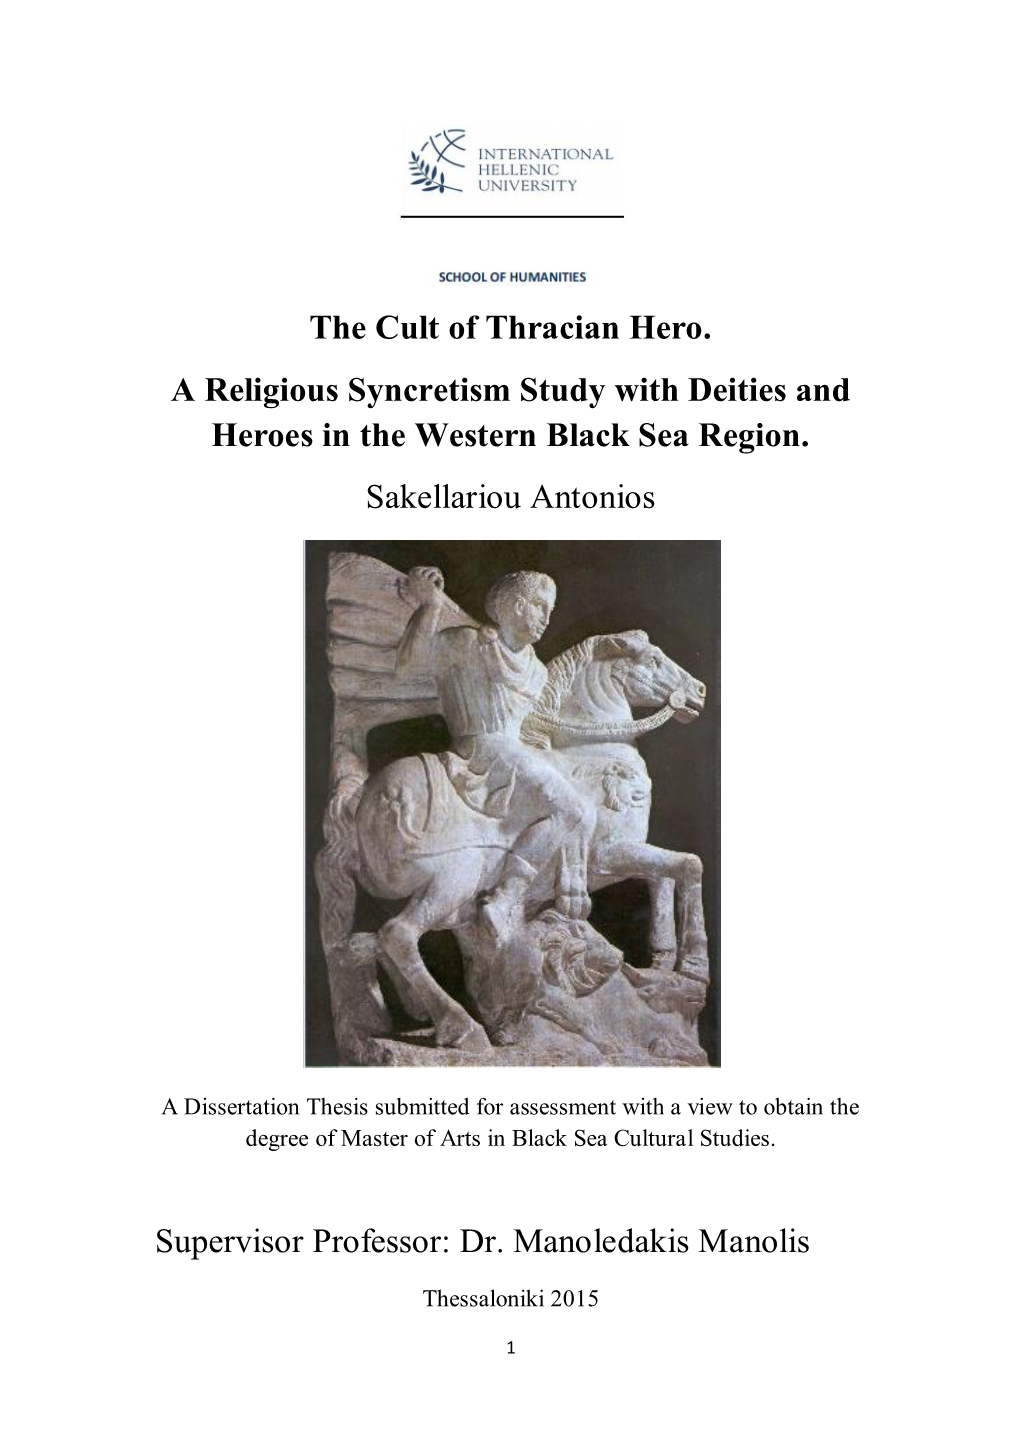 The Cult of Thracian Hero. a Religious Syncretism Study with Deities and Heroes in the Western Black Sea Region. Sakellariou Antonios